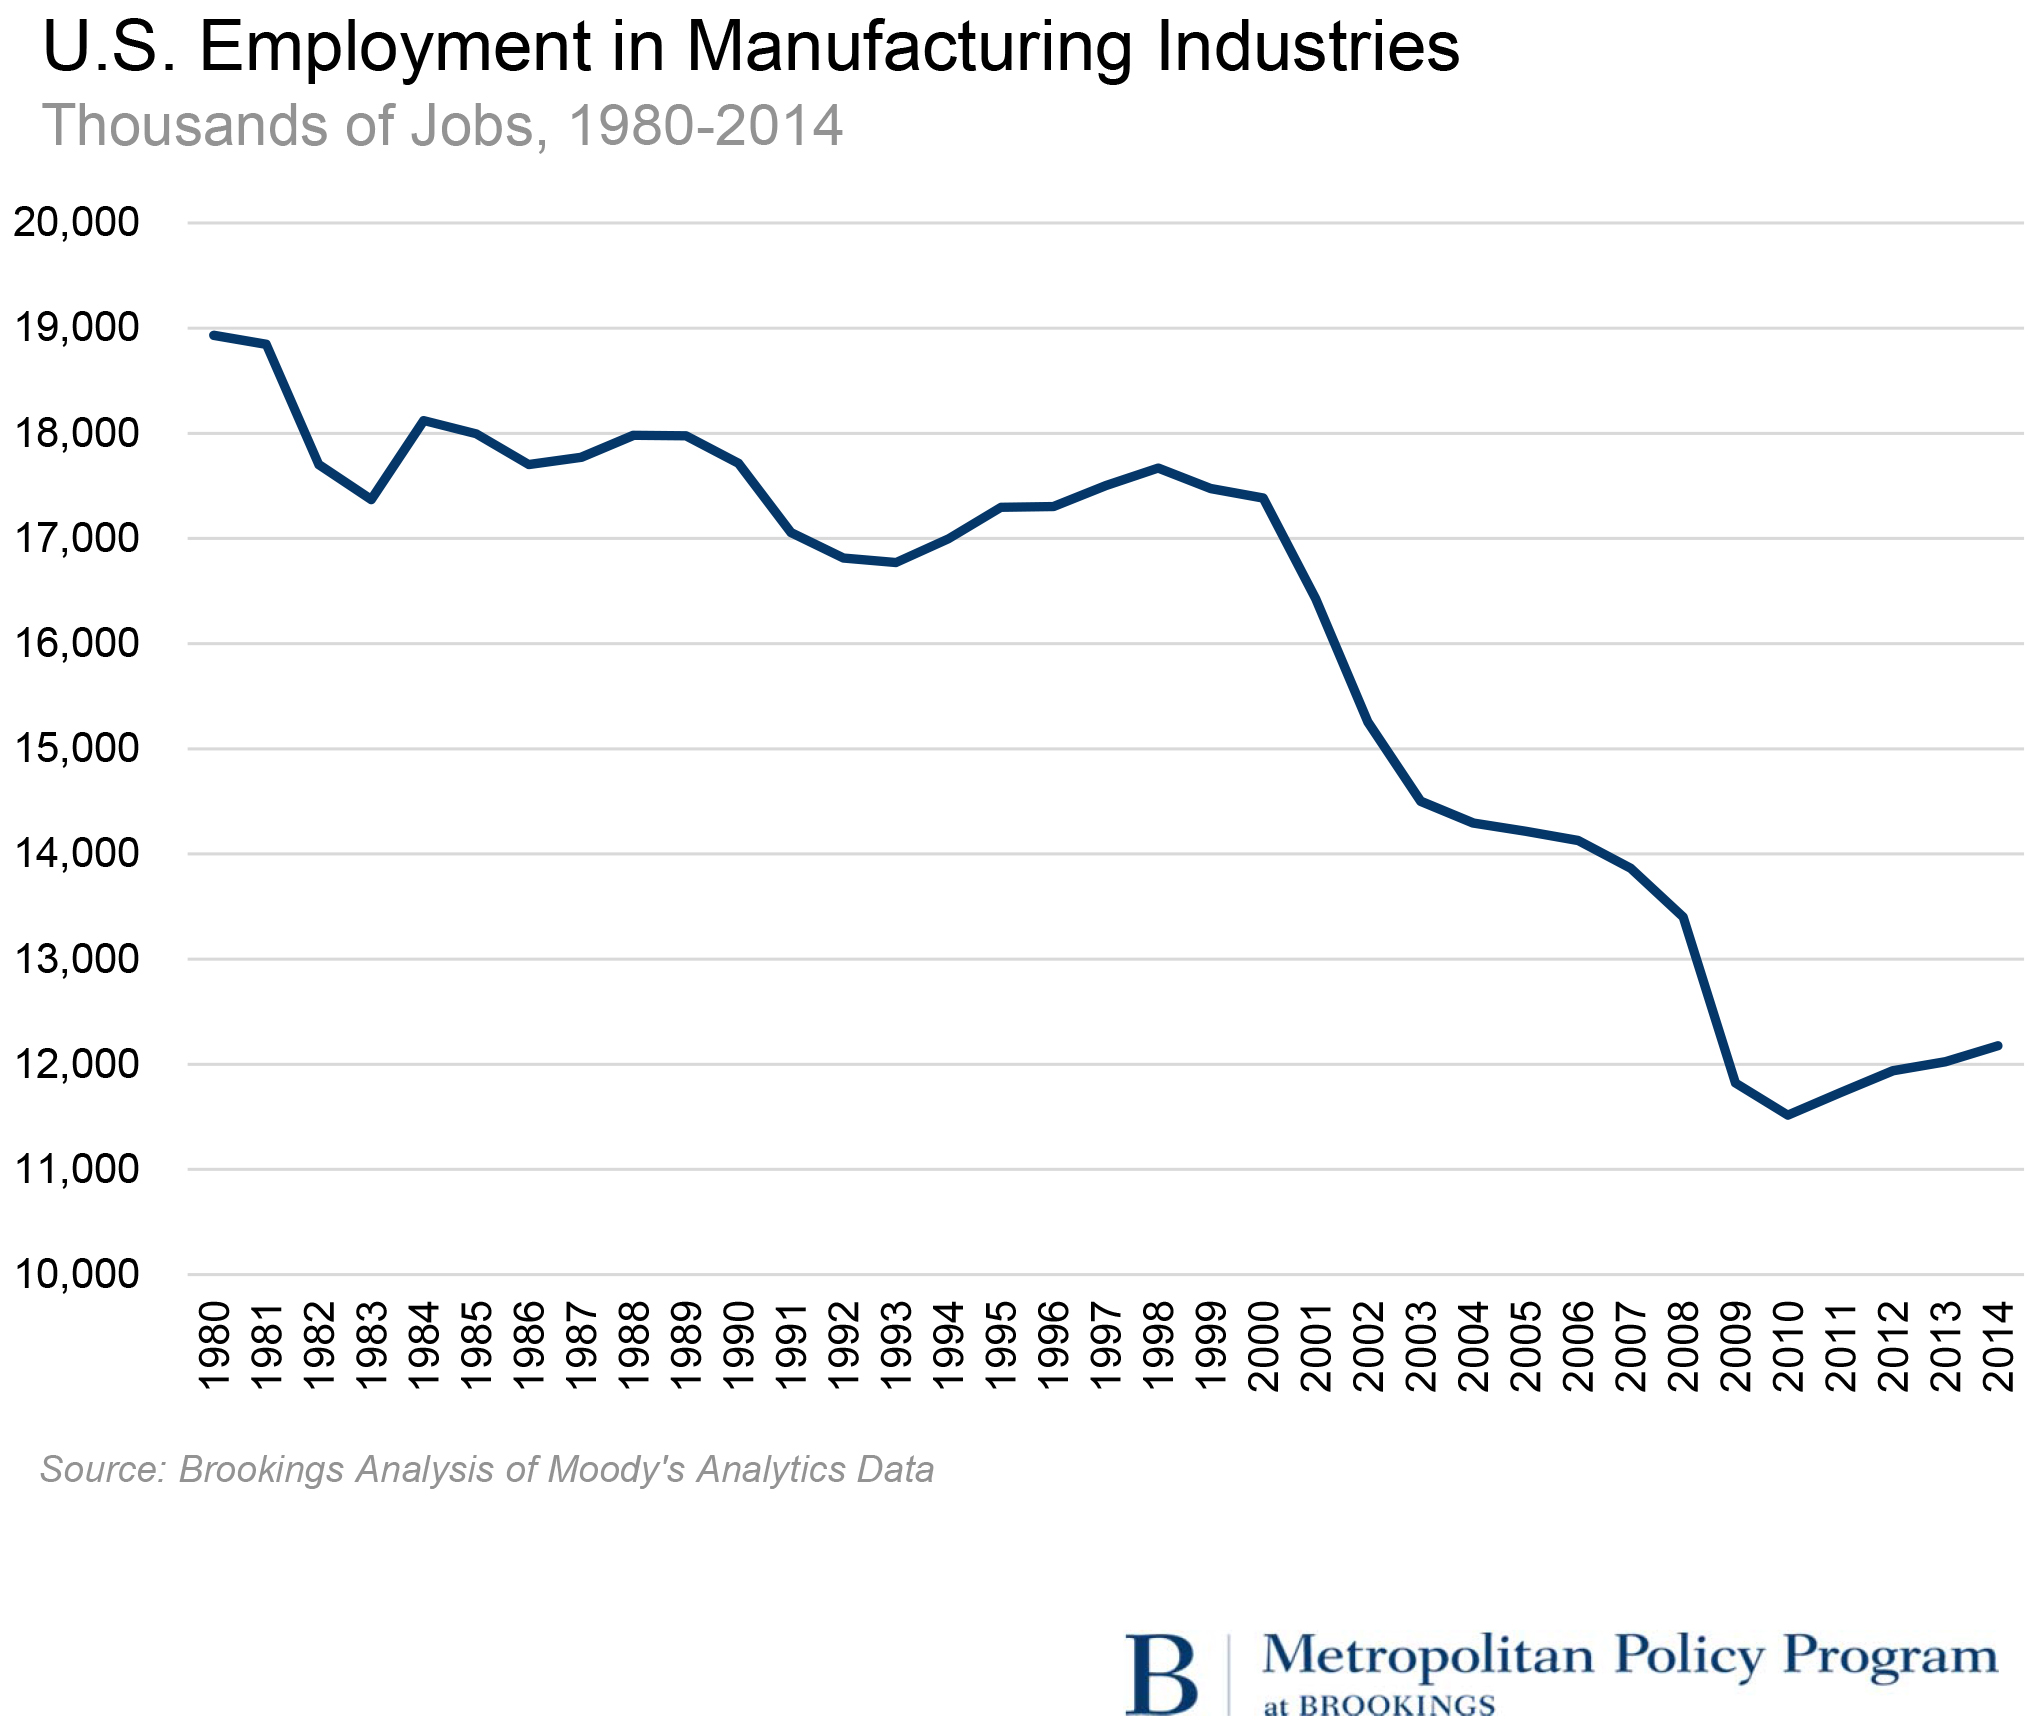 MM-and-SK-on-Voter-Anger-Manufacturing-Employment-Decline1-1.jpg